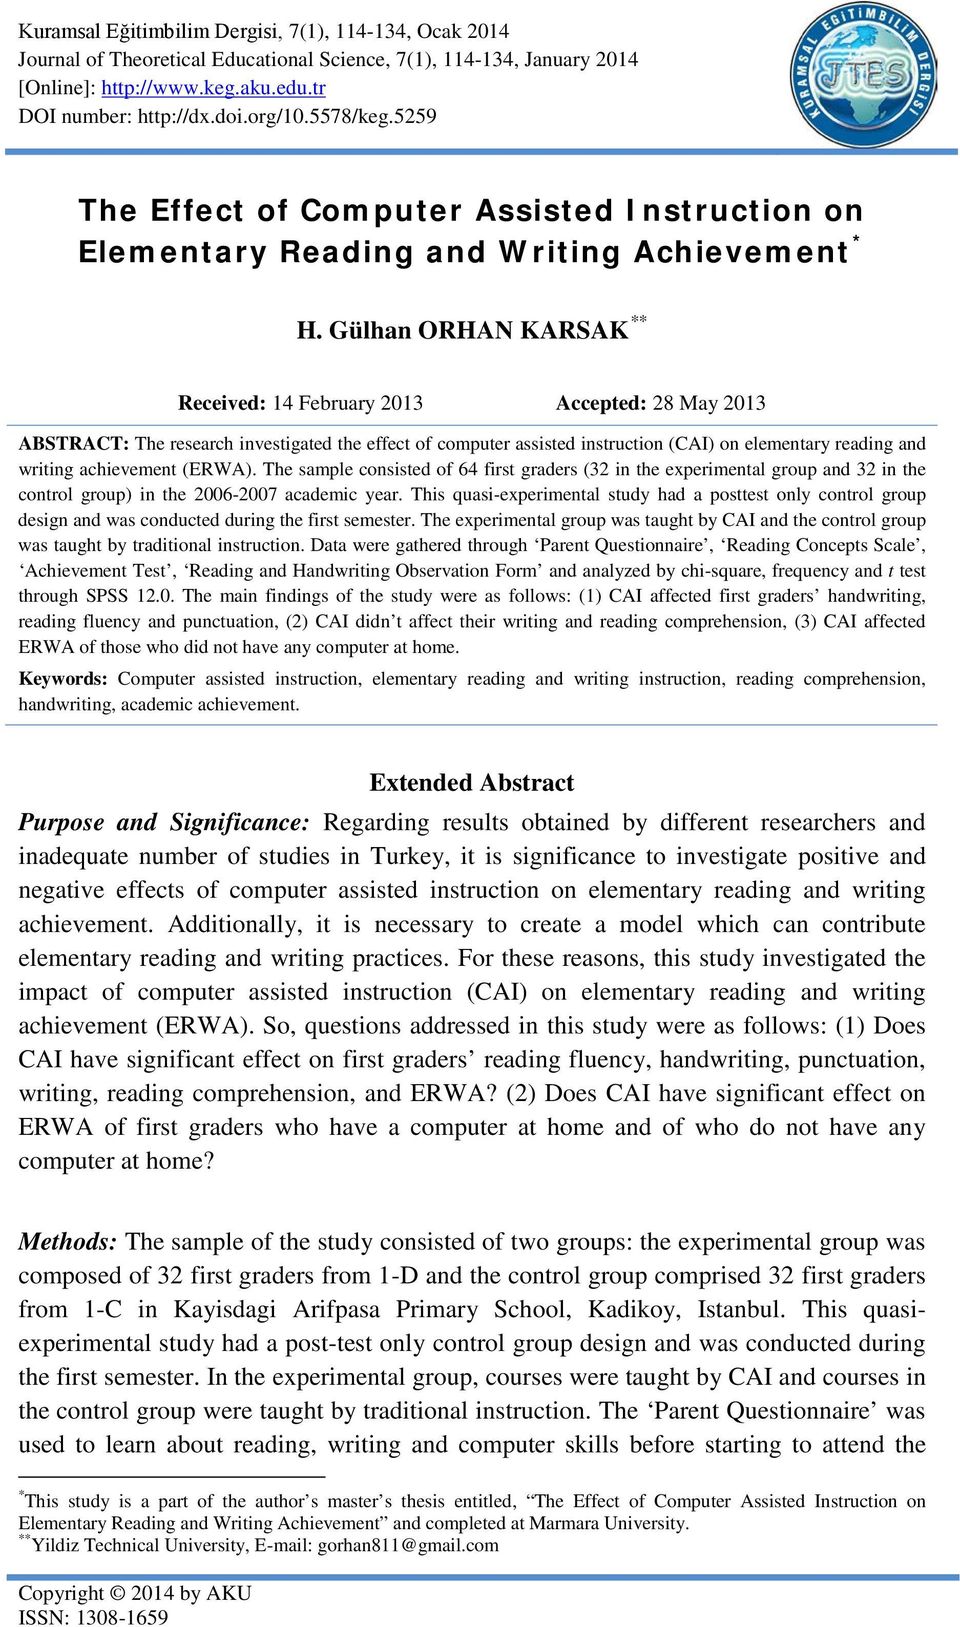 Gülhan ORHAN KARSAK ** Received: 14 February 2013 Accepted: 28 May 2013 ABSTRACT: The research investigated the effect of computer assisted instruction (CAI) on elementary reading and writing